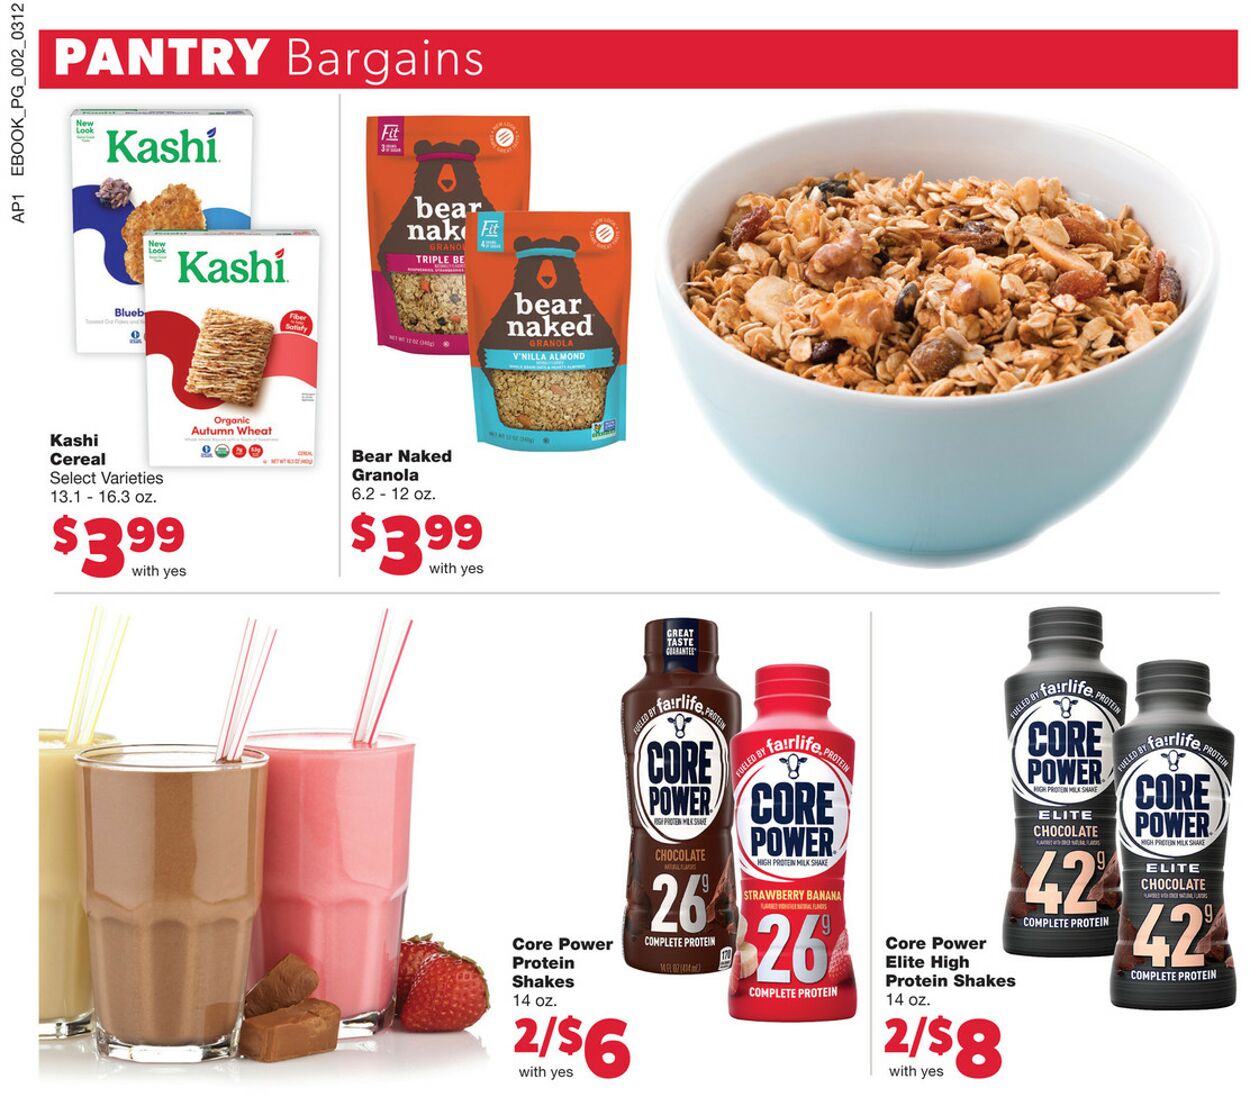 Weekly ad Family Fare 03/19/2023 - 03/25/2023